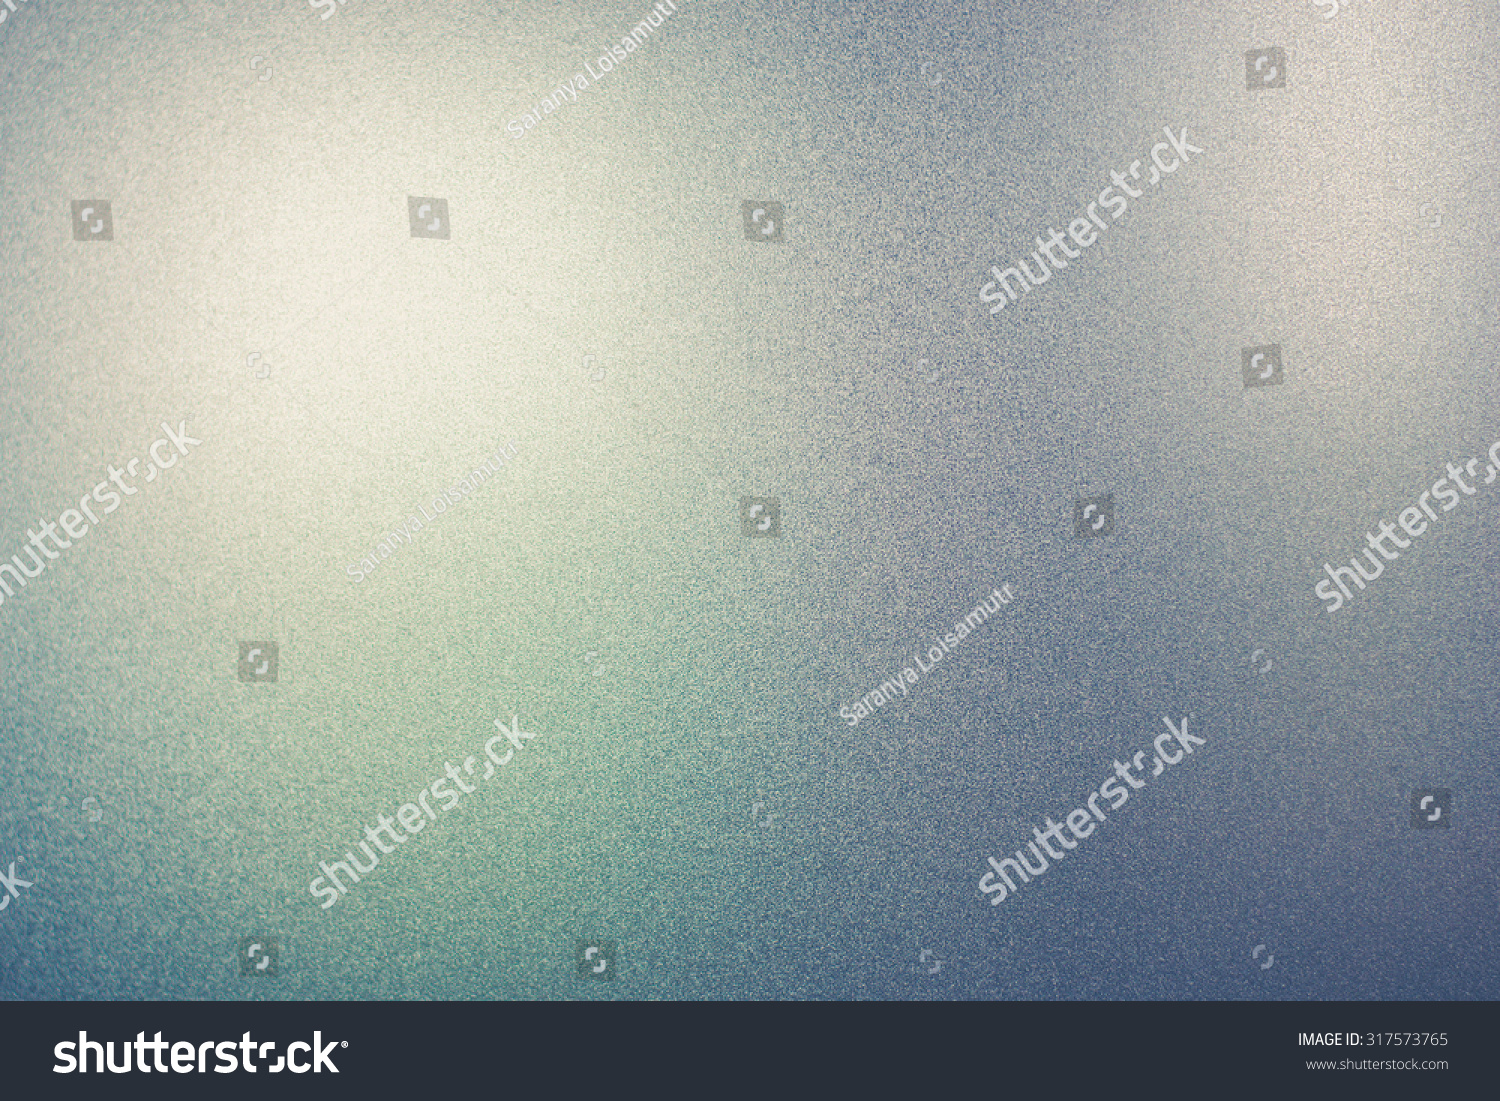 abstract backgrounds, characteristics of the light strikes the surface, causing noise and grain texture #317573765